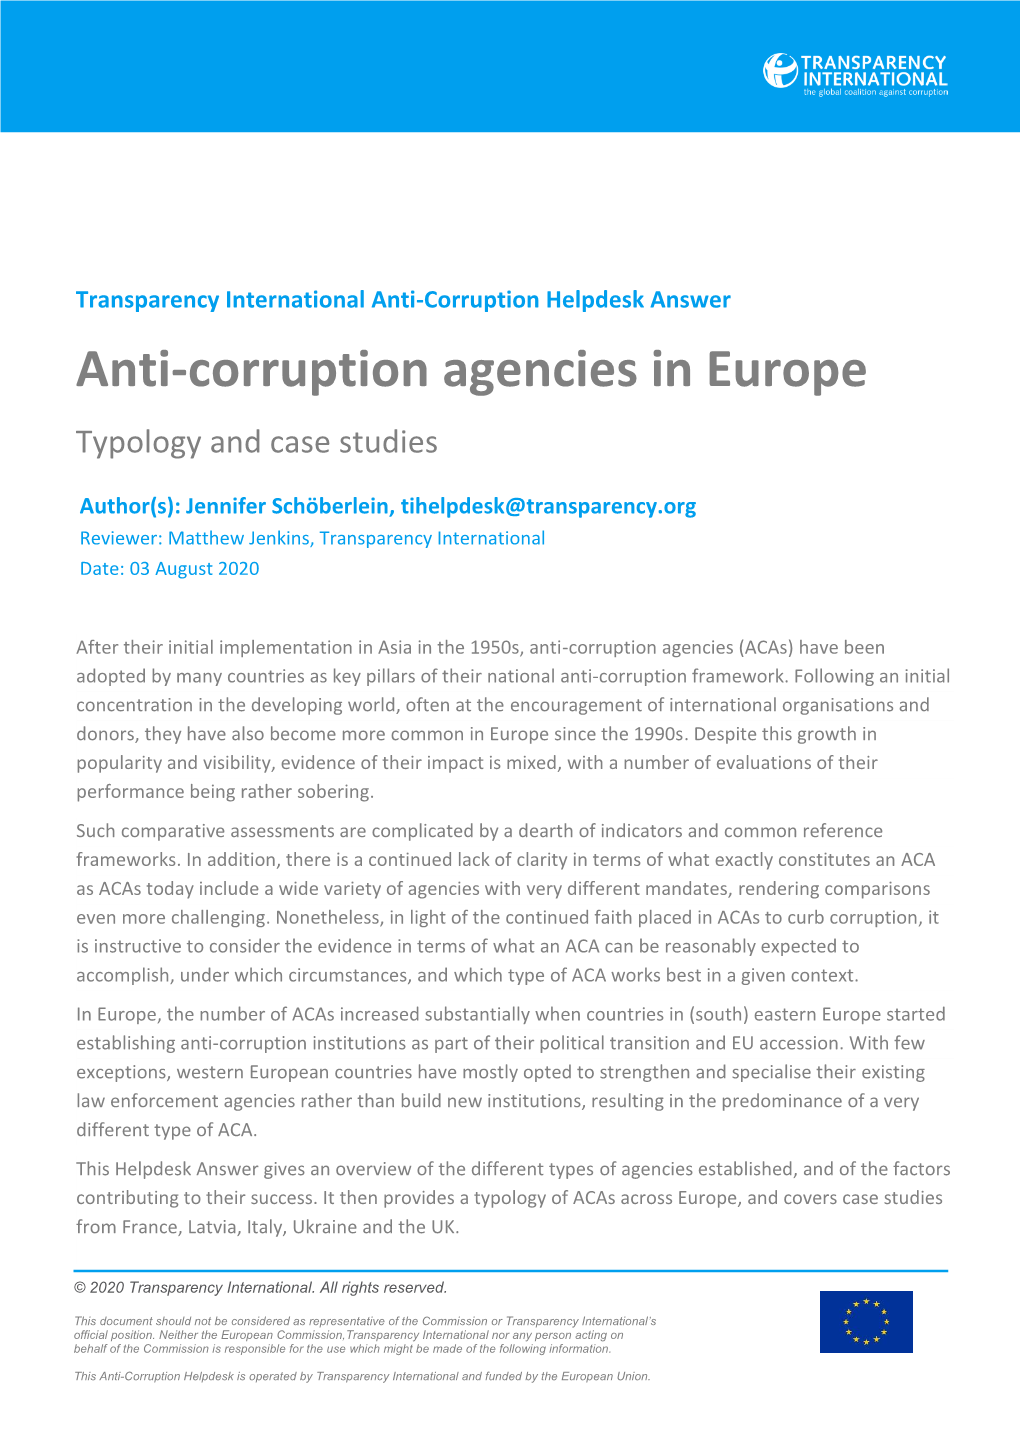 Anti-Corruption Agencies in Europe Typology and Case Studies